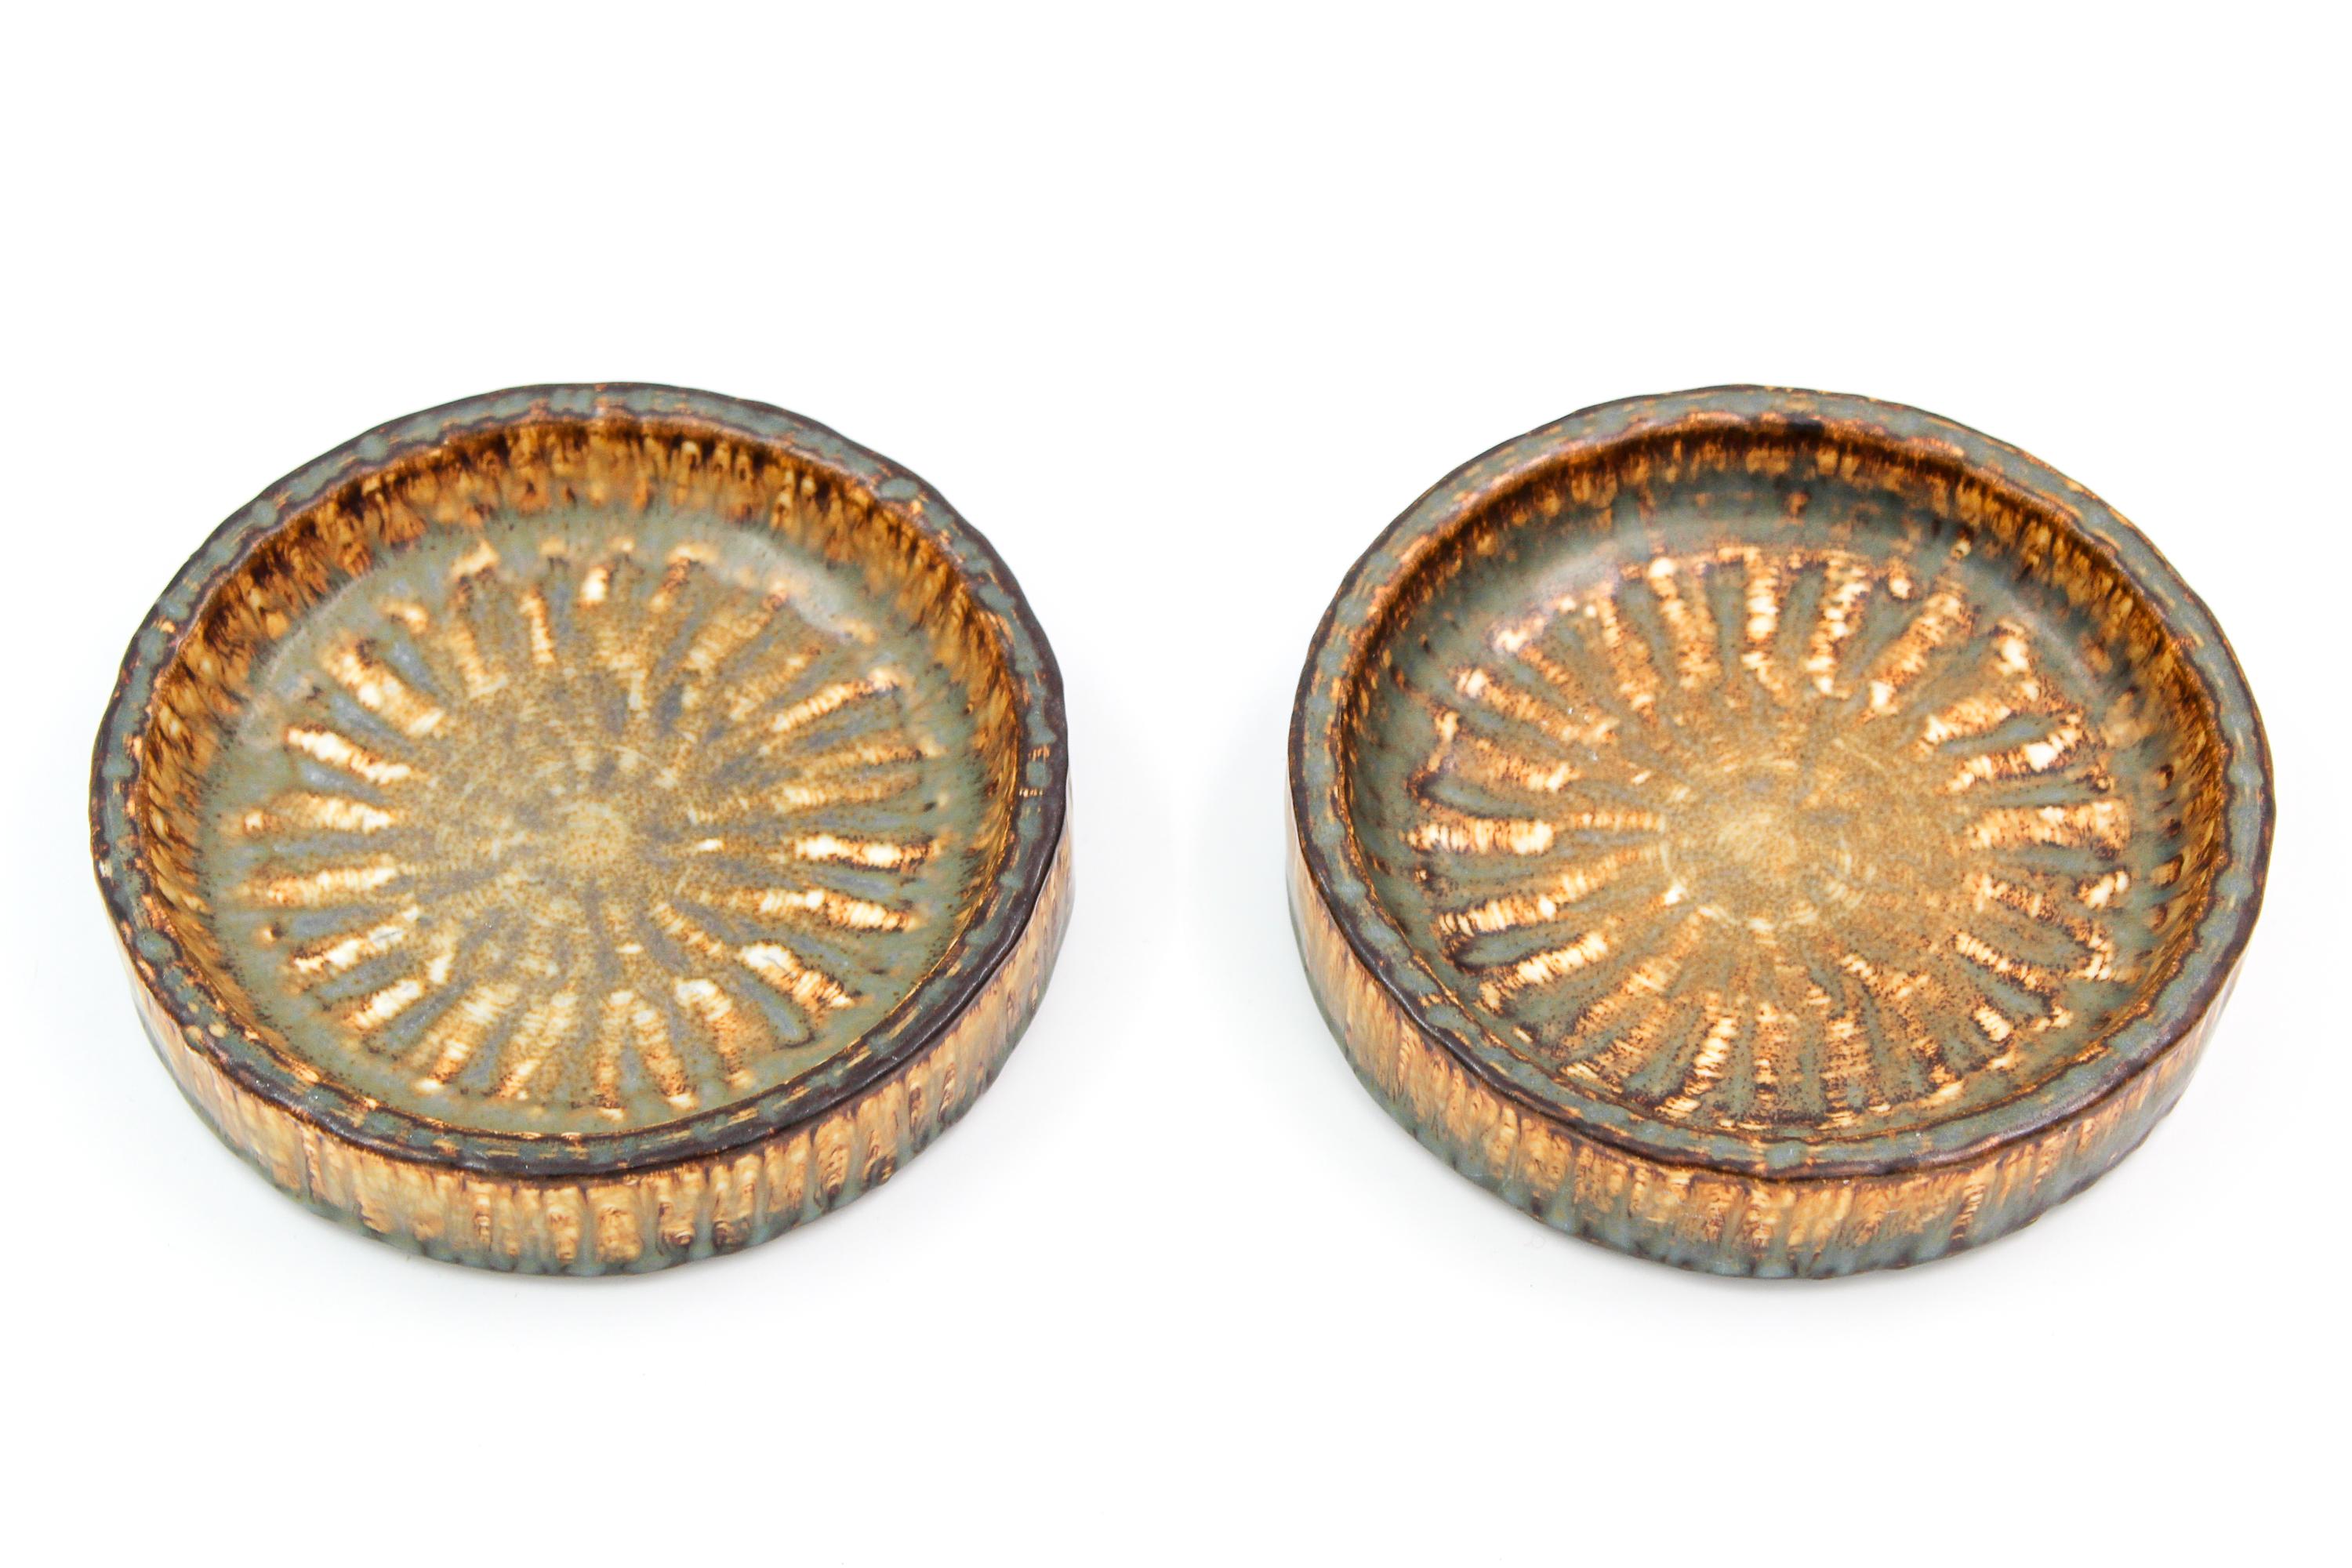 Scandinavian Modern Pair of Midcentury Ceramic Bowls by Gunnar Nylund for Rörstrand, 1950s For Sale